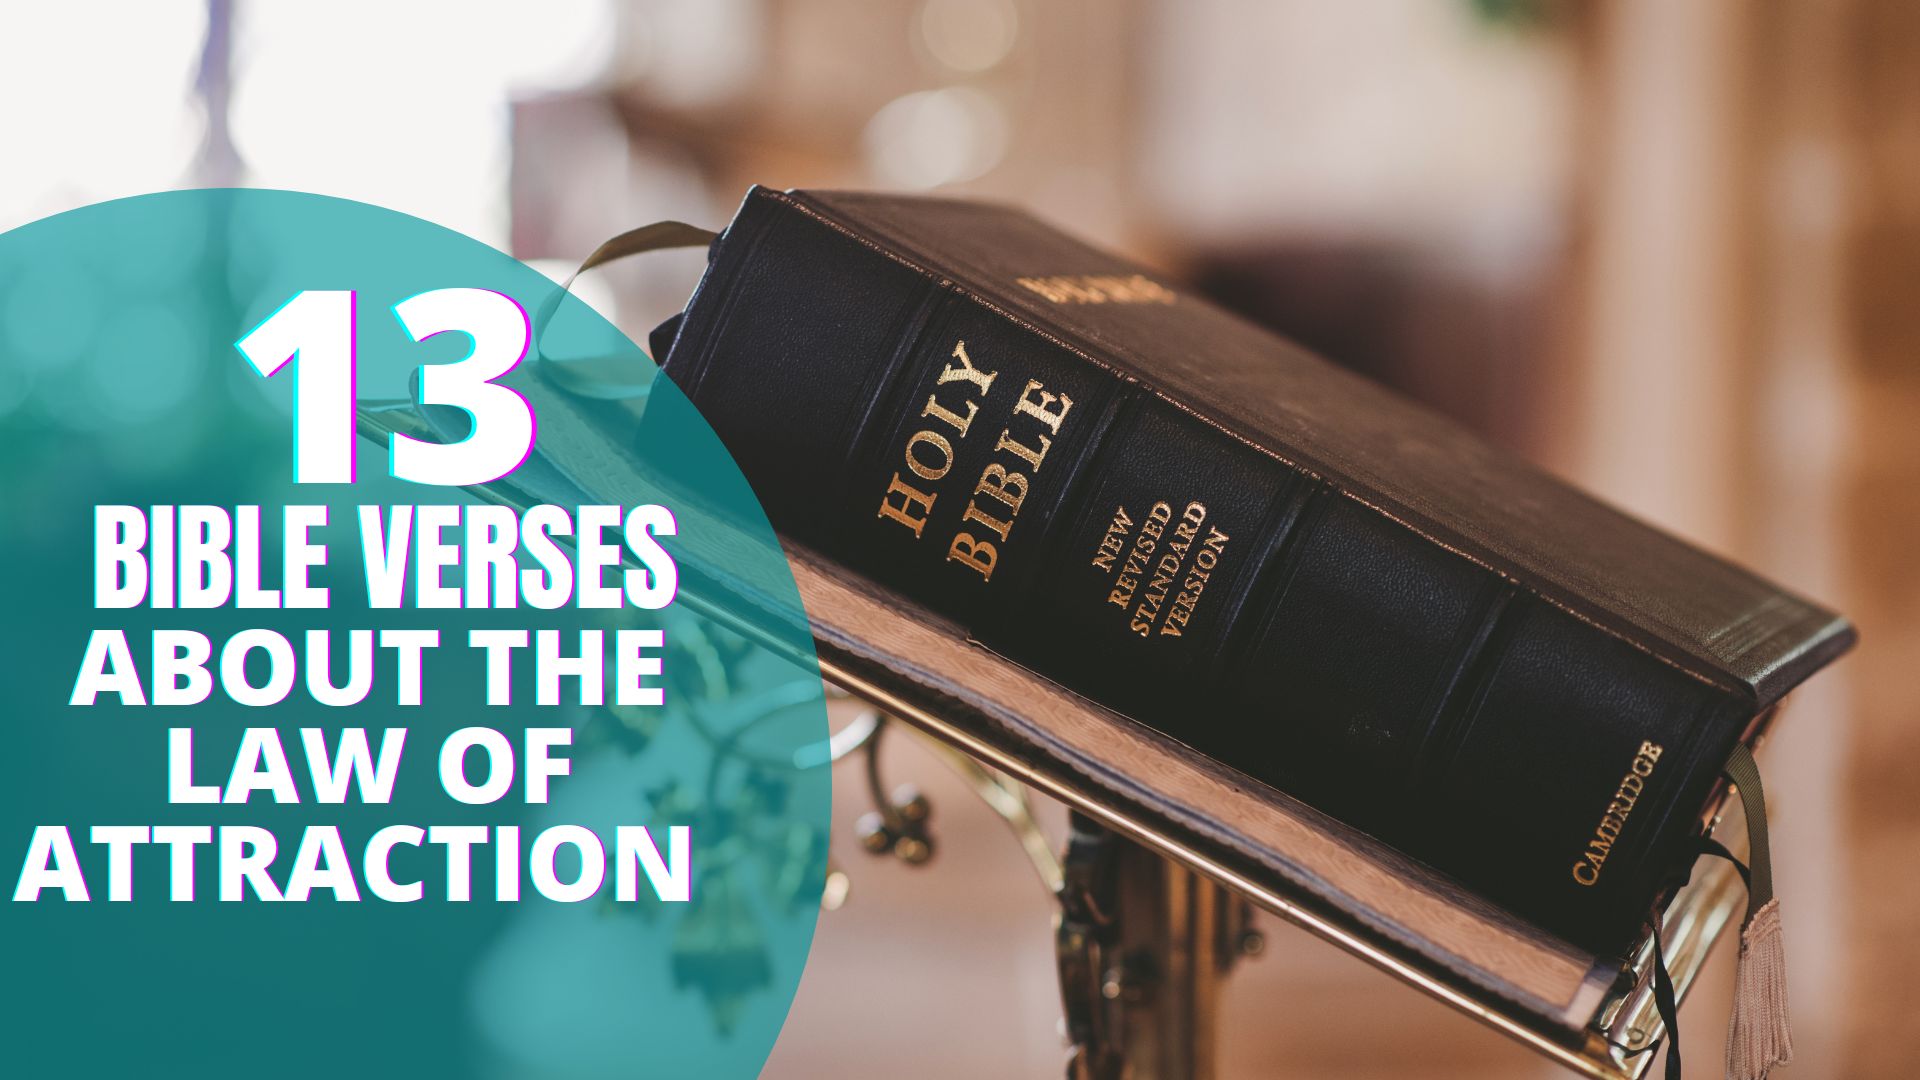 Bible verses about law of attraction